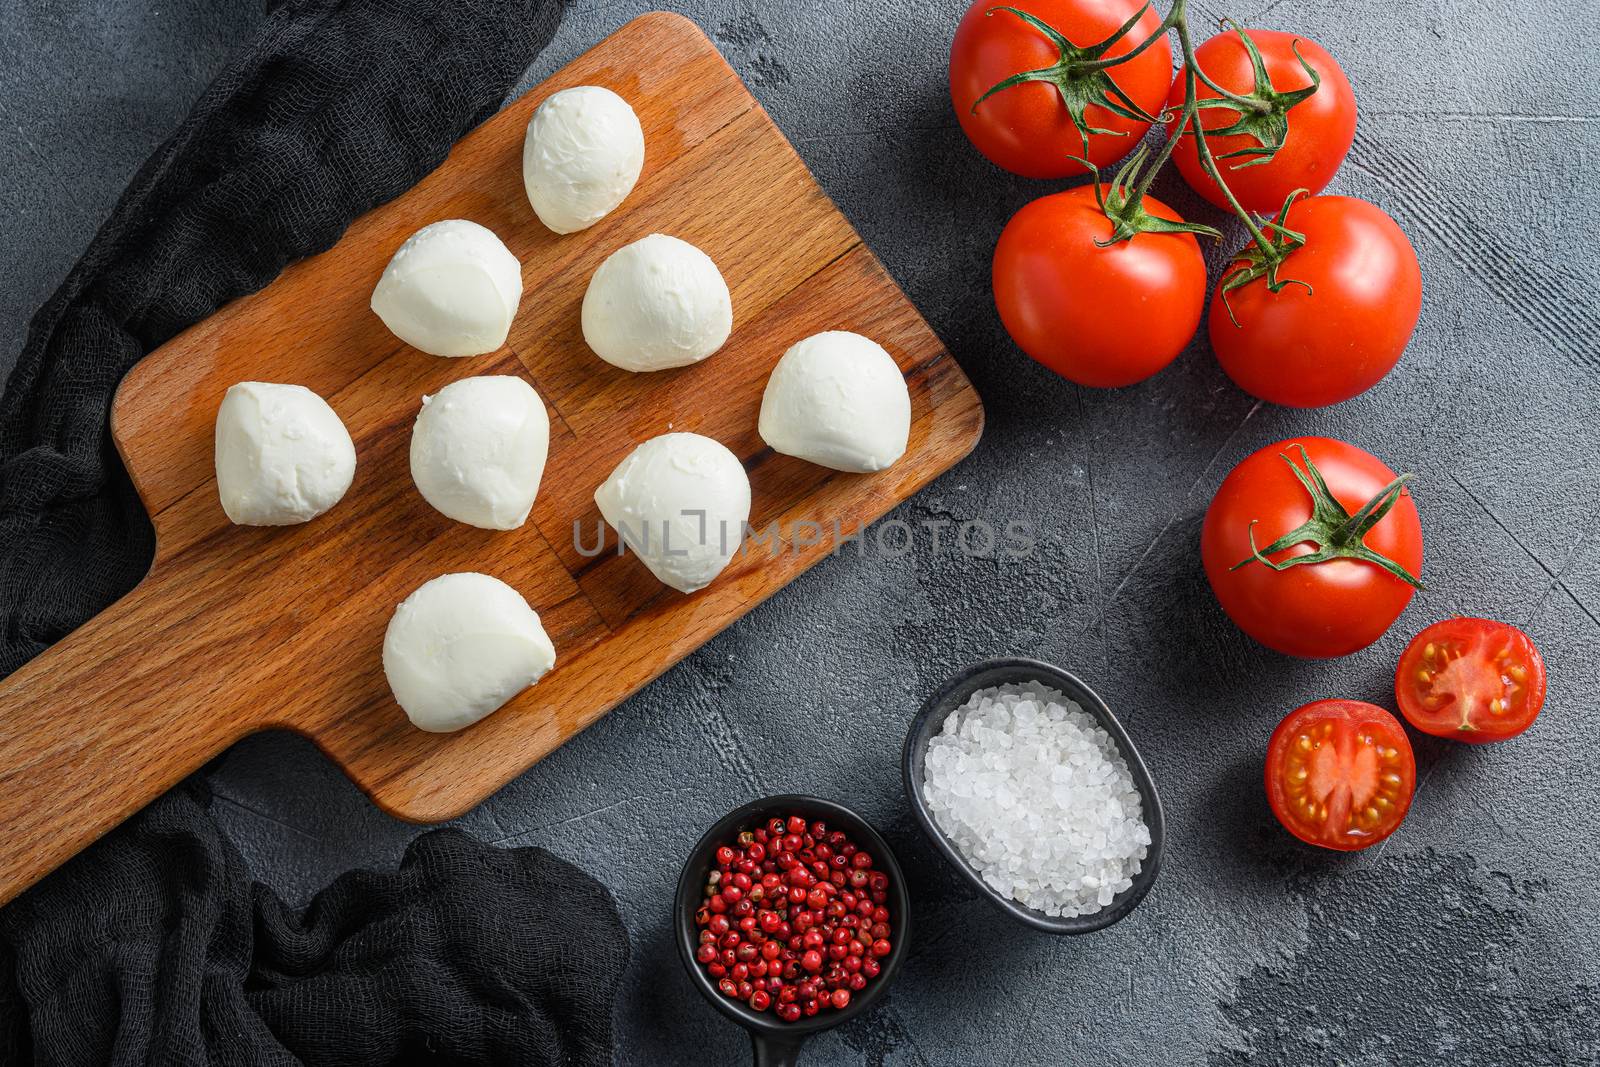 Buffalo Mozzarella cheese balls with fresh basil leaves and cherry tomatoes, the ingredients of the Italian Caprese salad, on a black cloth and grey concrete background by Ilianesolenyi